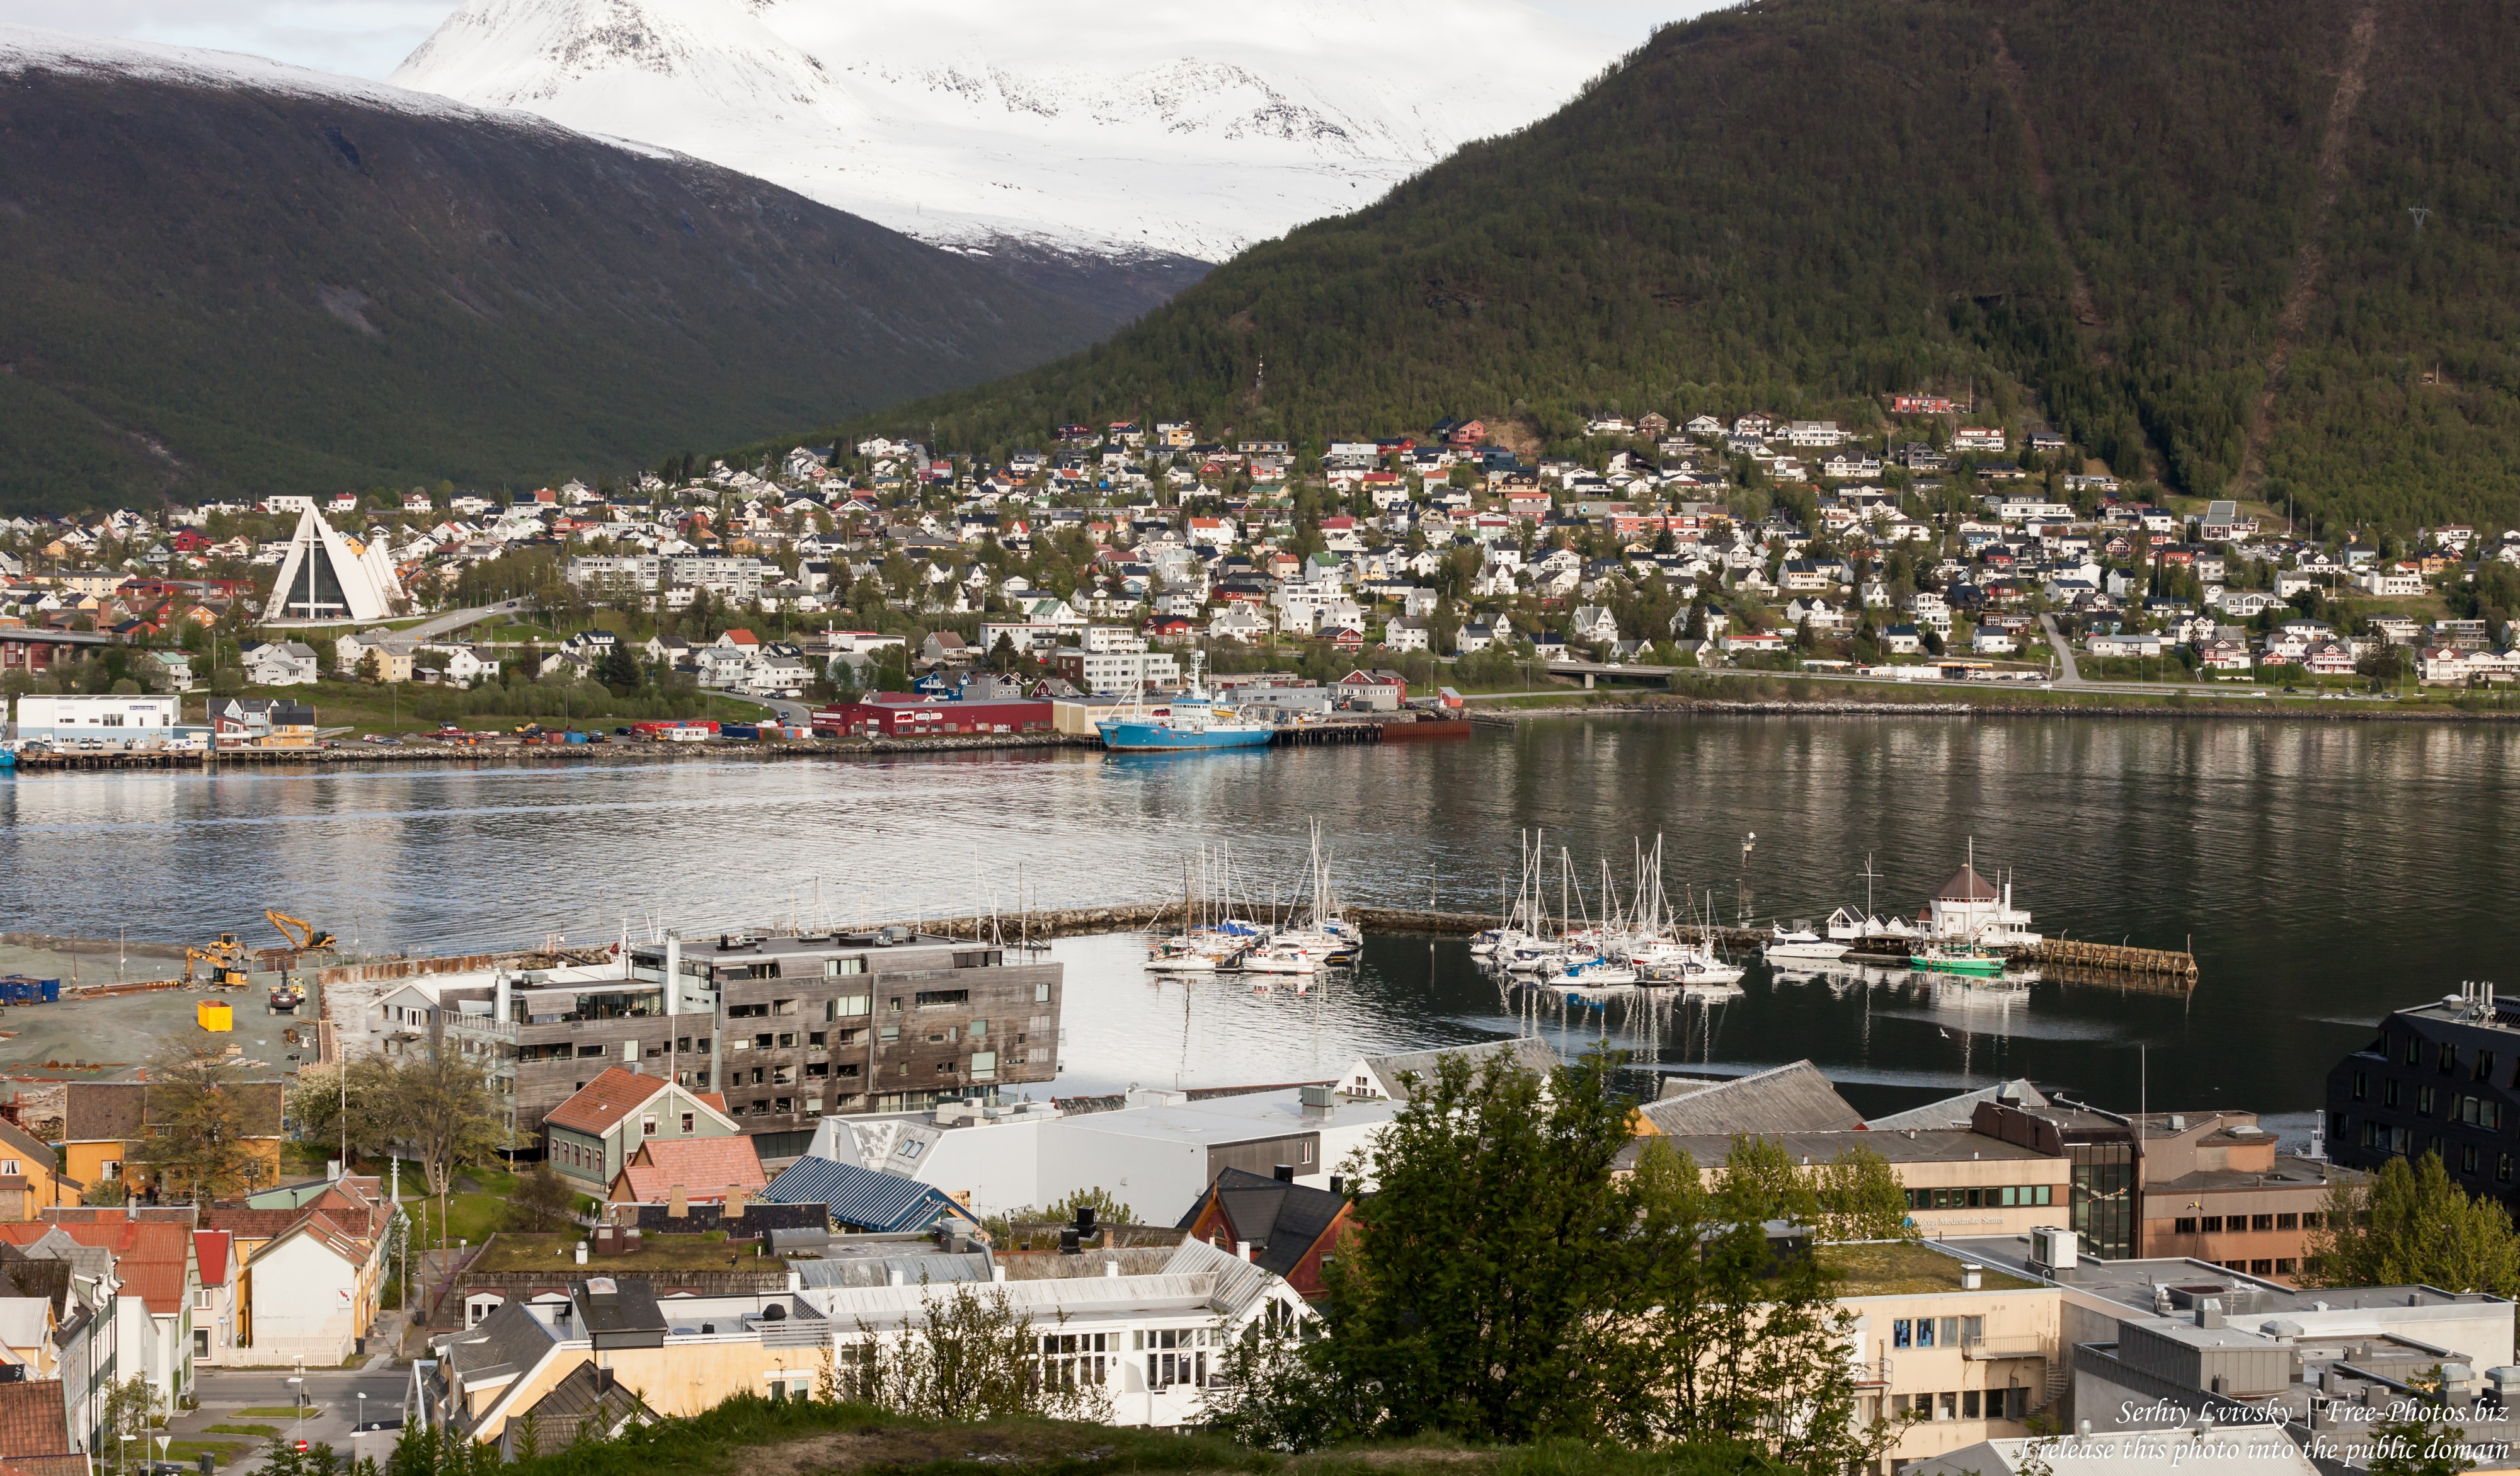 Tromso, Norway, photographed in June 2018 by Serhiy Lvivsky, picture 63